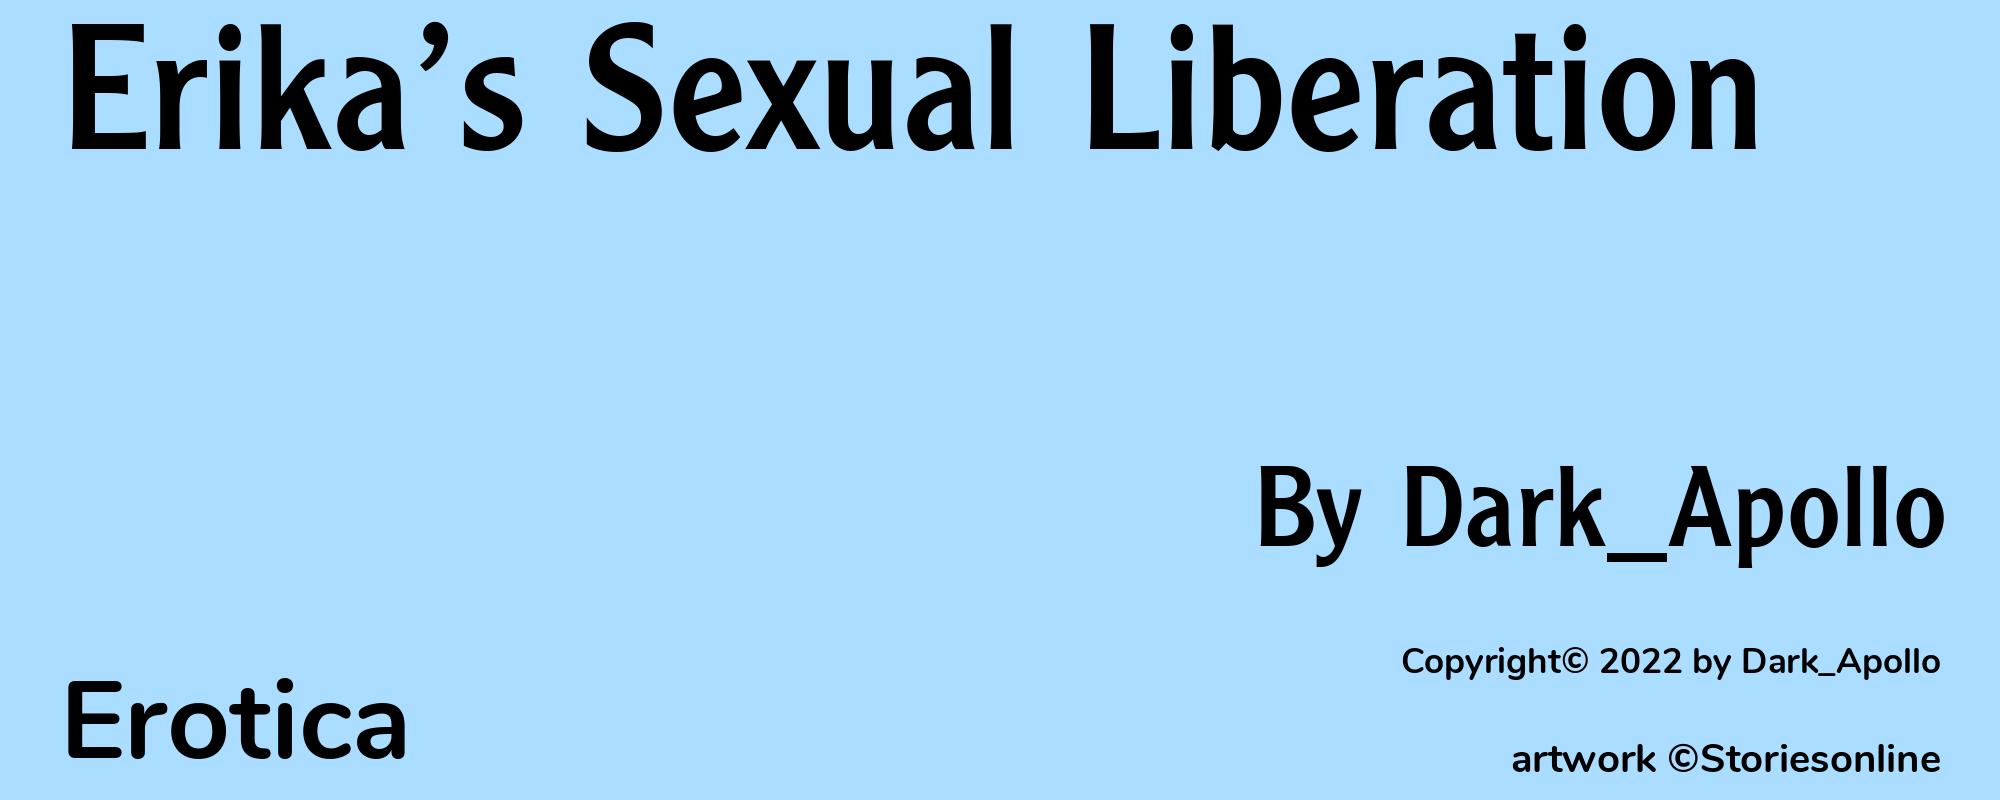 Erika’s Sexual Liberation - Cover